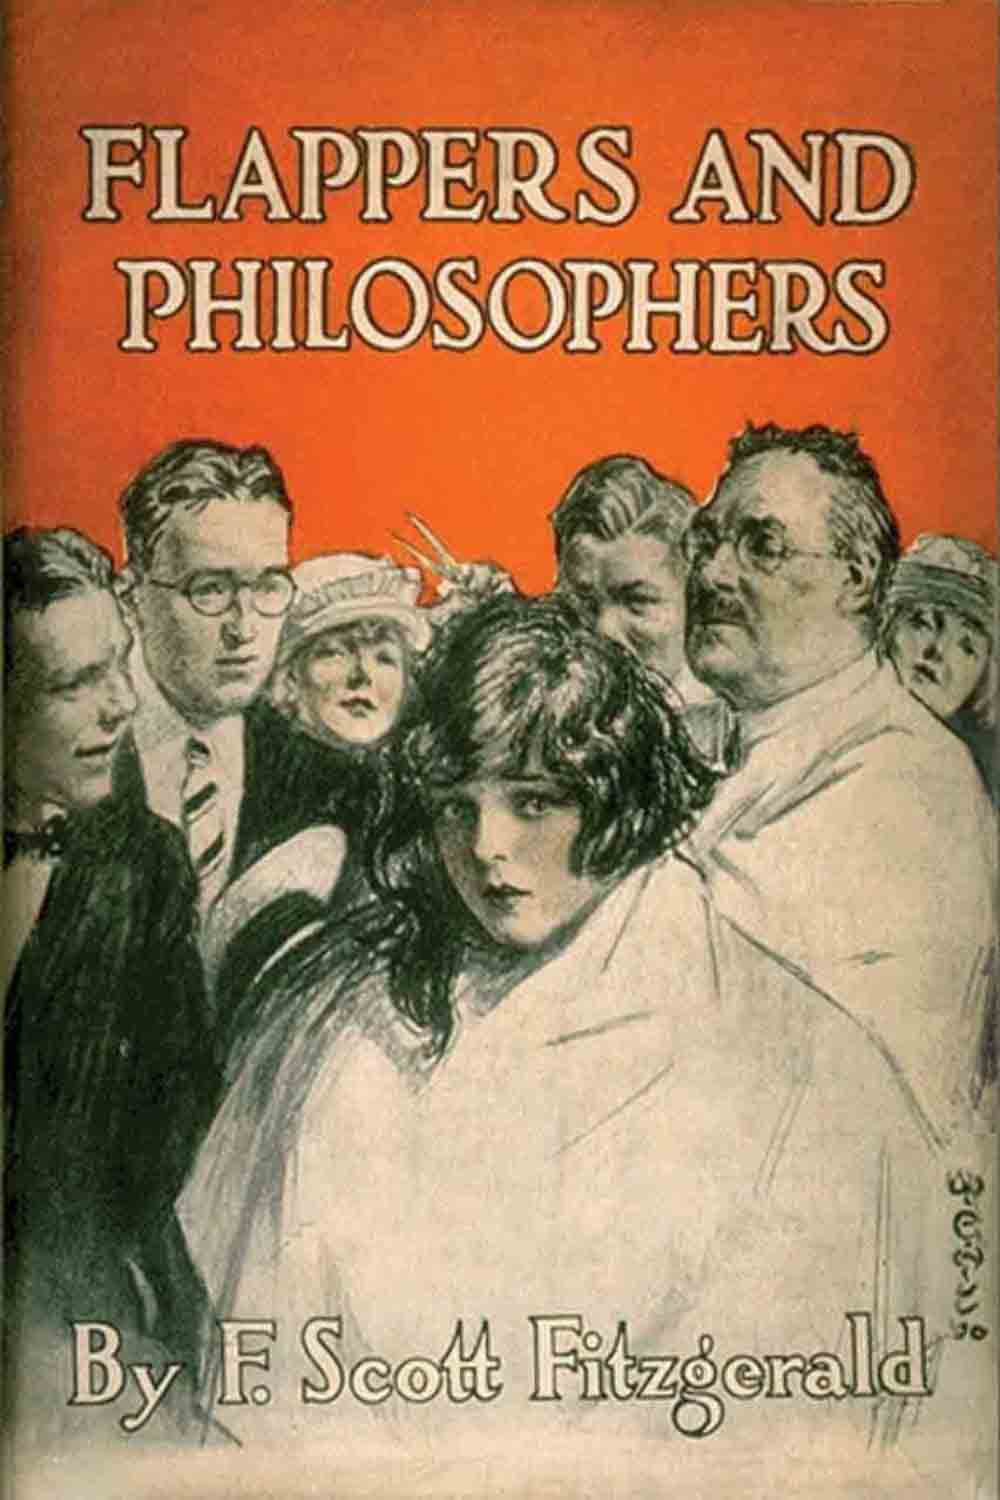 Flappers and Philosophers Book Cover 1920 F Scott Fitzgerald